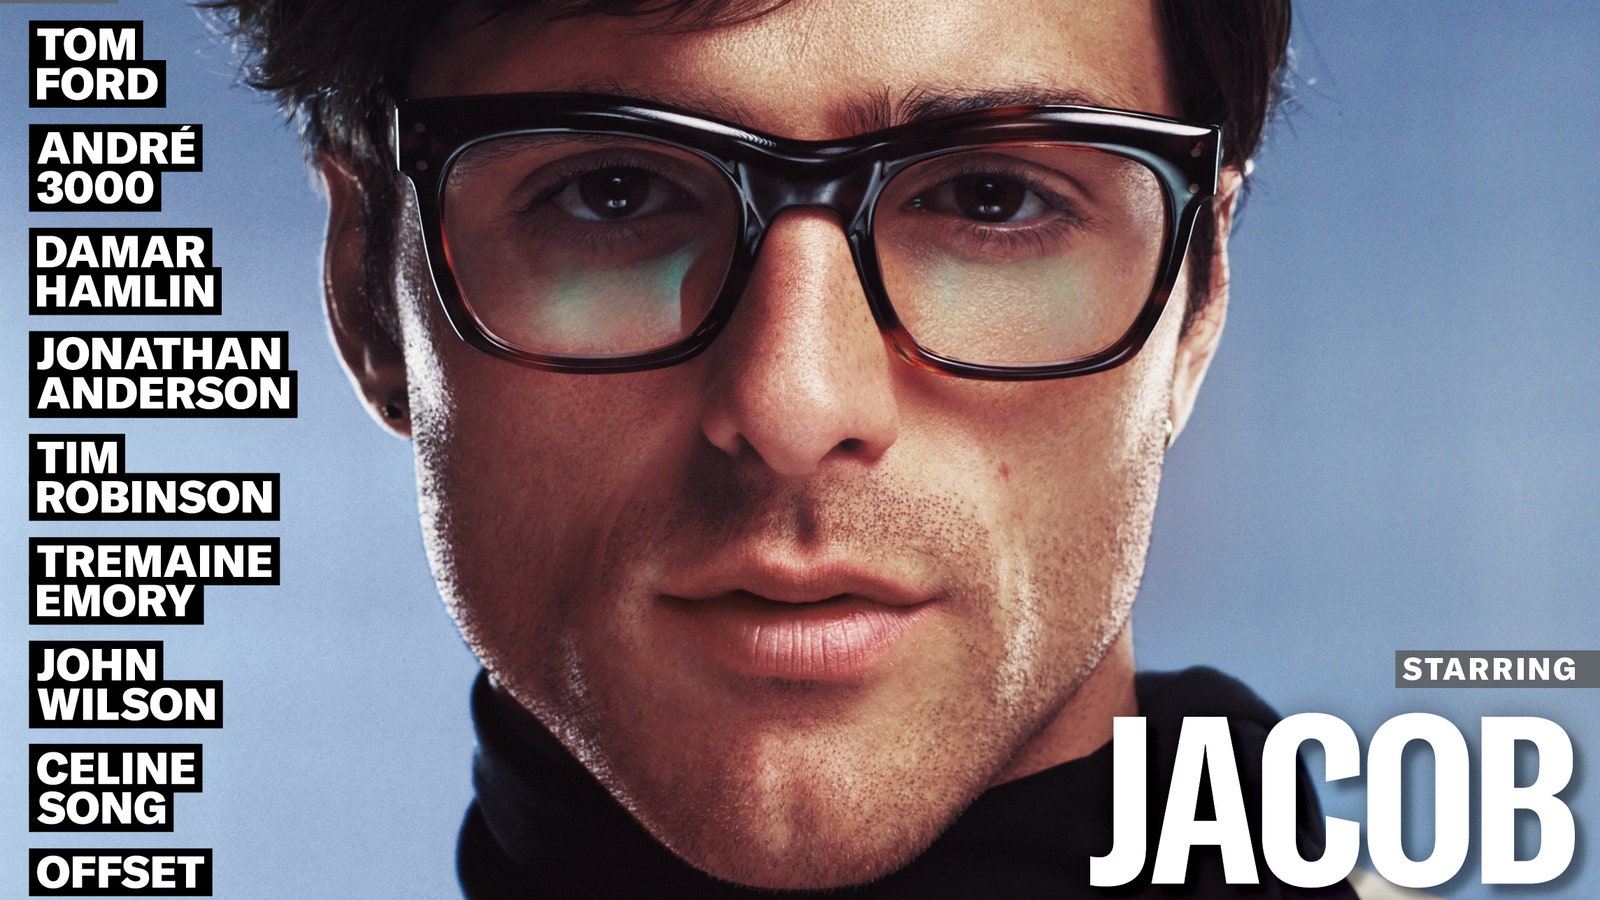 Introducing the 2023 GQ Men of the Year Issue, Starring Jacob Elordi, Tom Ford, and More